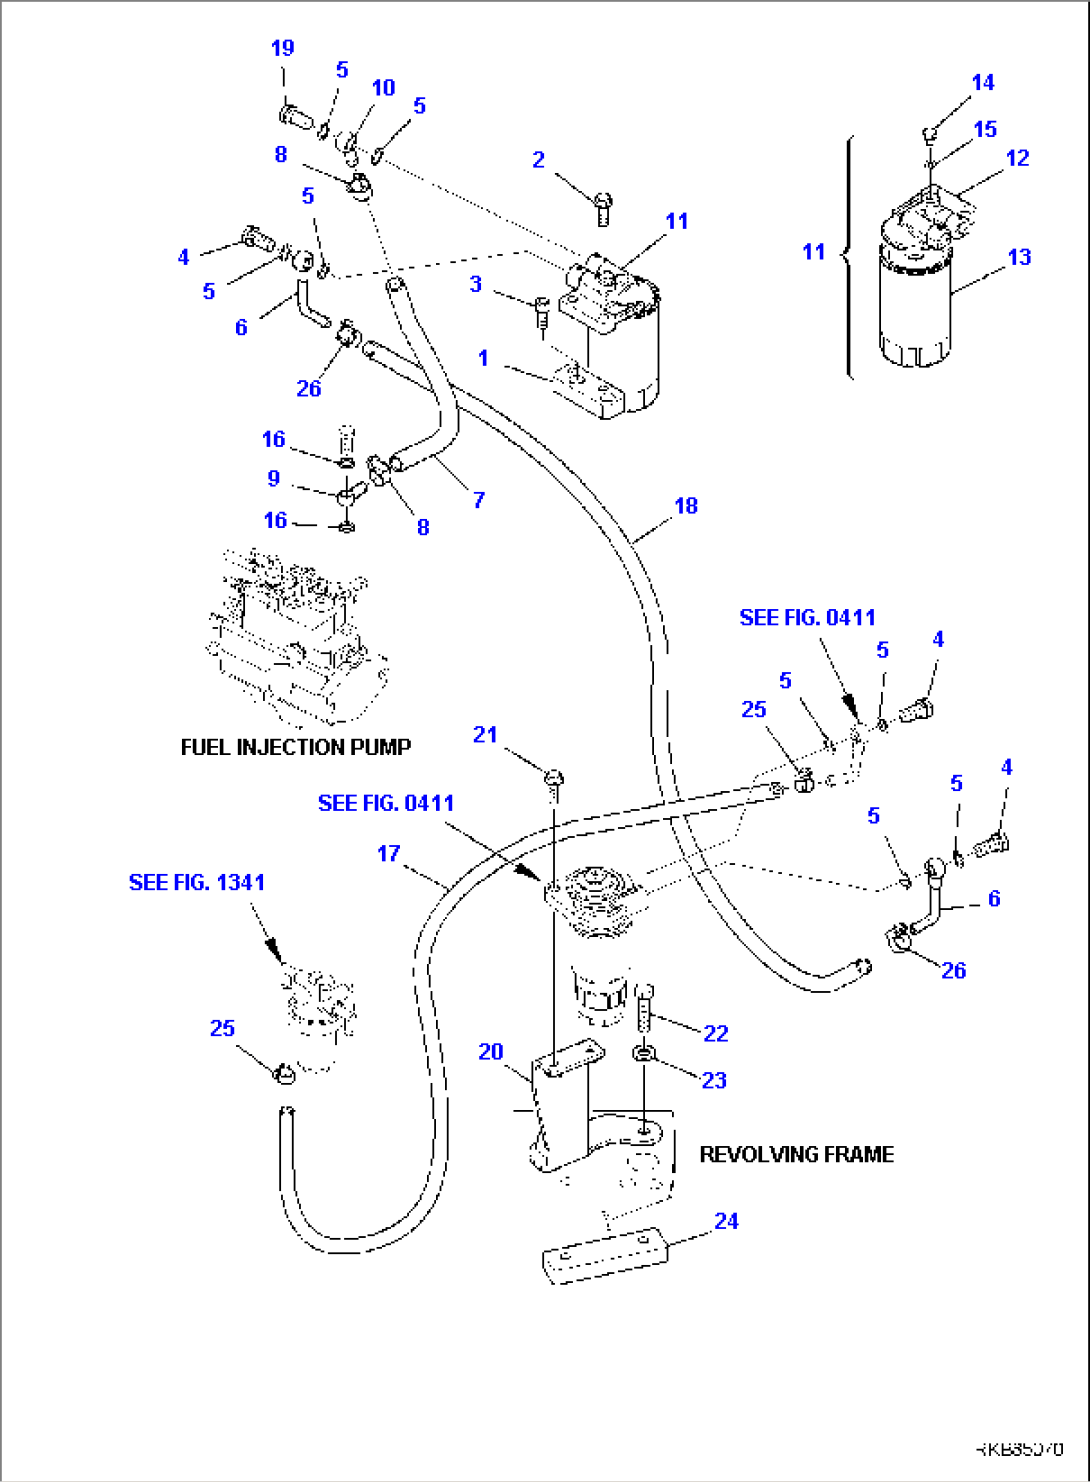 FUEL PIPING (2/2)